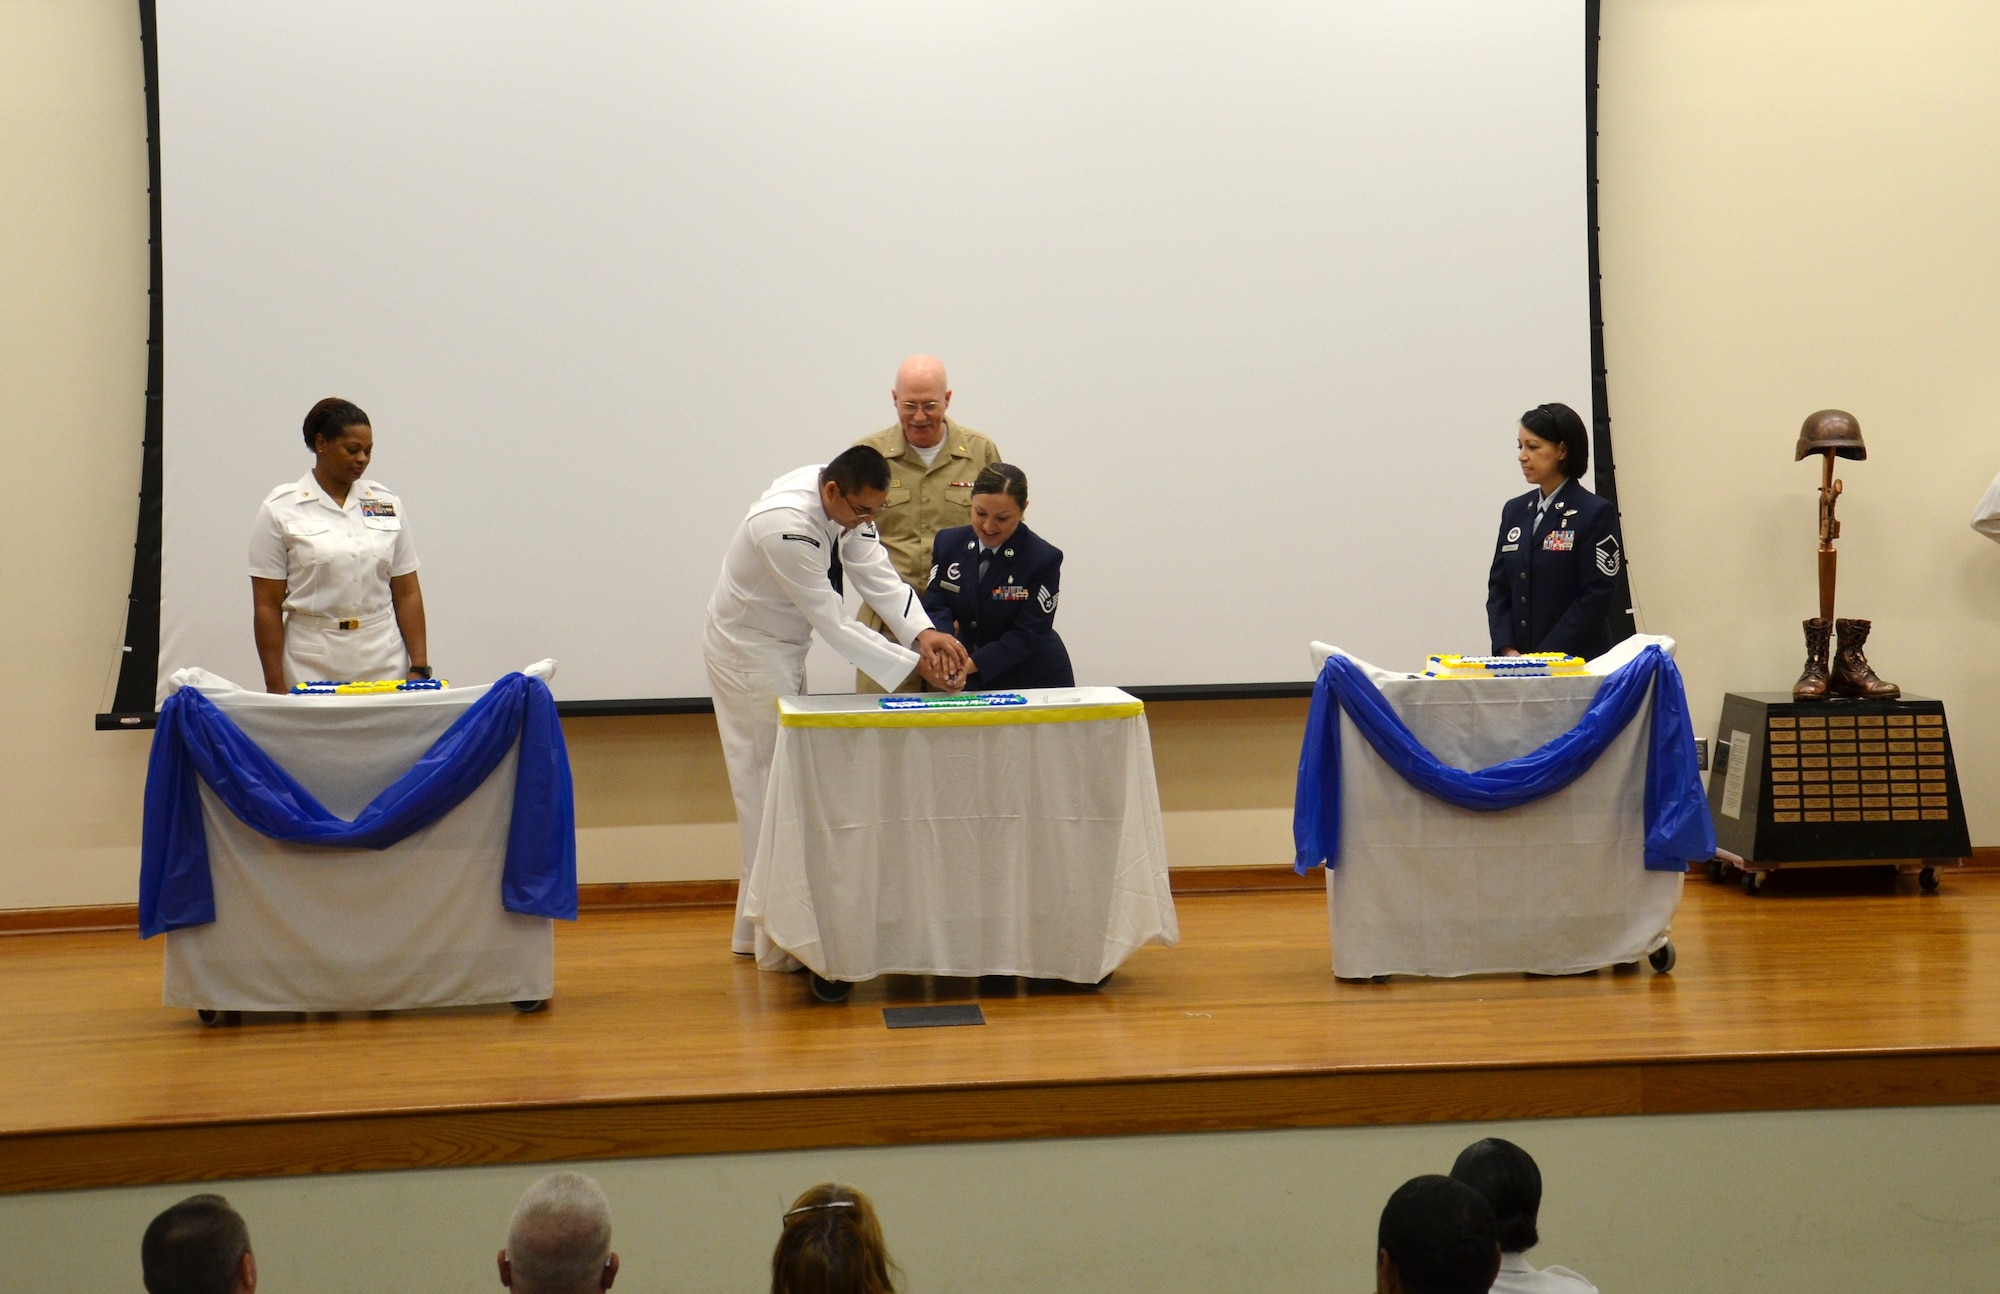 FORT SAM HOUSTON, Texas (April 27, 2012) The Basic Medical
Technician Corpsman Program (BMTCP), a combined Air Force medical technician
and Navy hospital corpsman training program, celebrated its one year
anniversary as one program at the Medical Education and Training Campus
(METC). A cake cutting ceremony symbolizing the joining of the Air Force and
Navy entry-level enlisted medical programs under METC was conducted by the
first and last assigned Navy and Air Force instructors as well as the
inaugural commandant, Rear Adm. Bob Kiser. (Left to right: Chief Hospital
Corpsman Carol Domino, first assigned Navy instructor; Hospital Corpsman Third
Class Brandon Chacon, last assigned Navy instructor; Rear Adm. Bob Kiser, METC
Commandant; Staff Sgt. Cassondra Johnson, last assigned Air Force instructor;
and Master Sgt. Debra Massa, first assigned Air Force instructor).
(U.S. Navy photo by Lisa Braun/Released)
